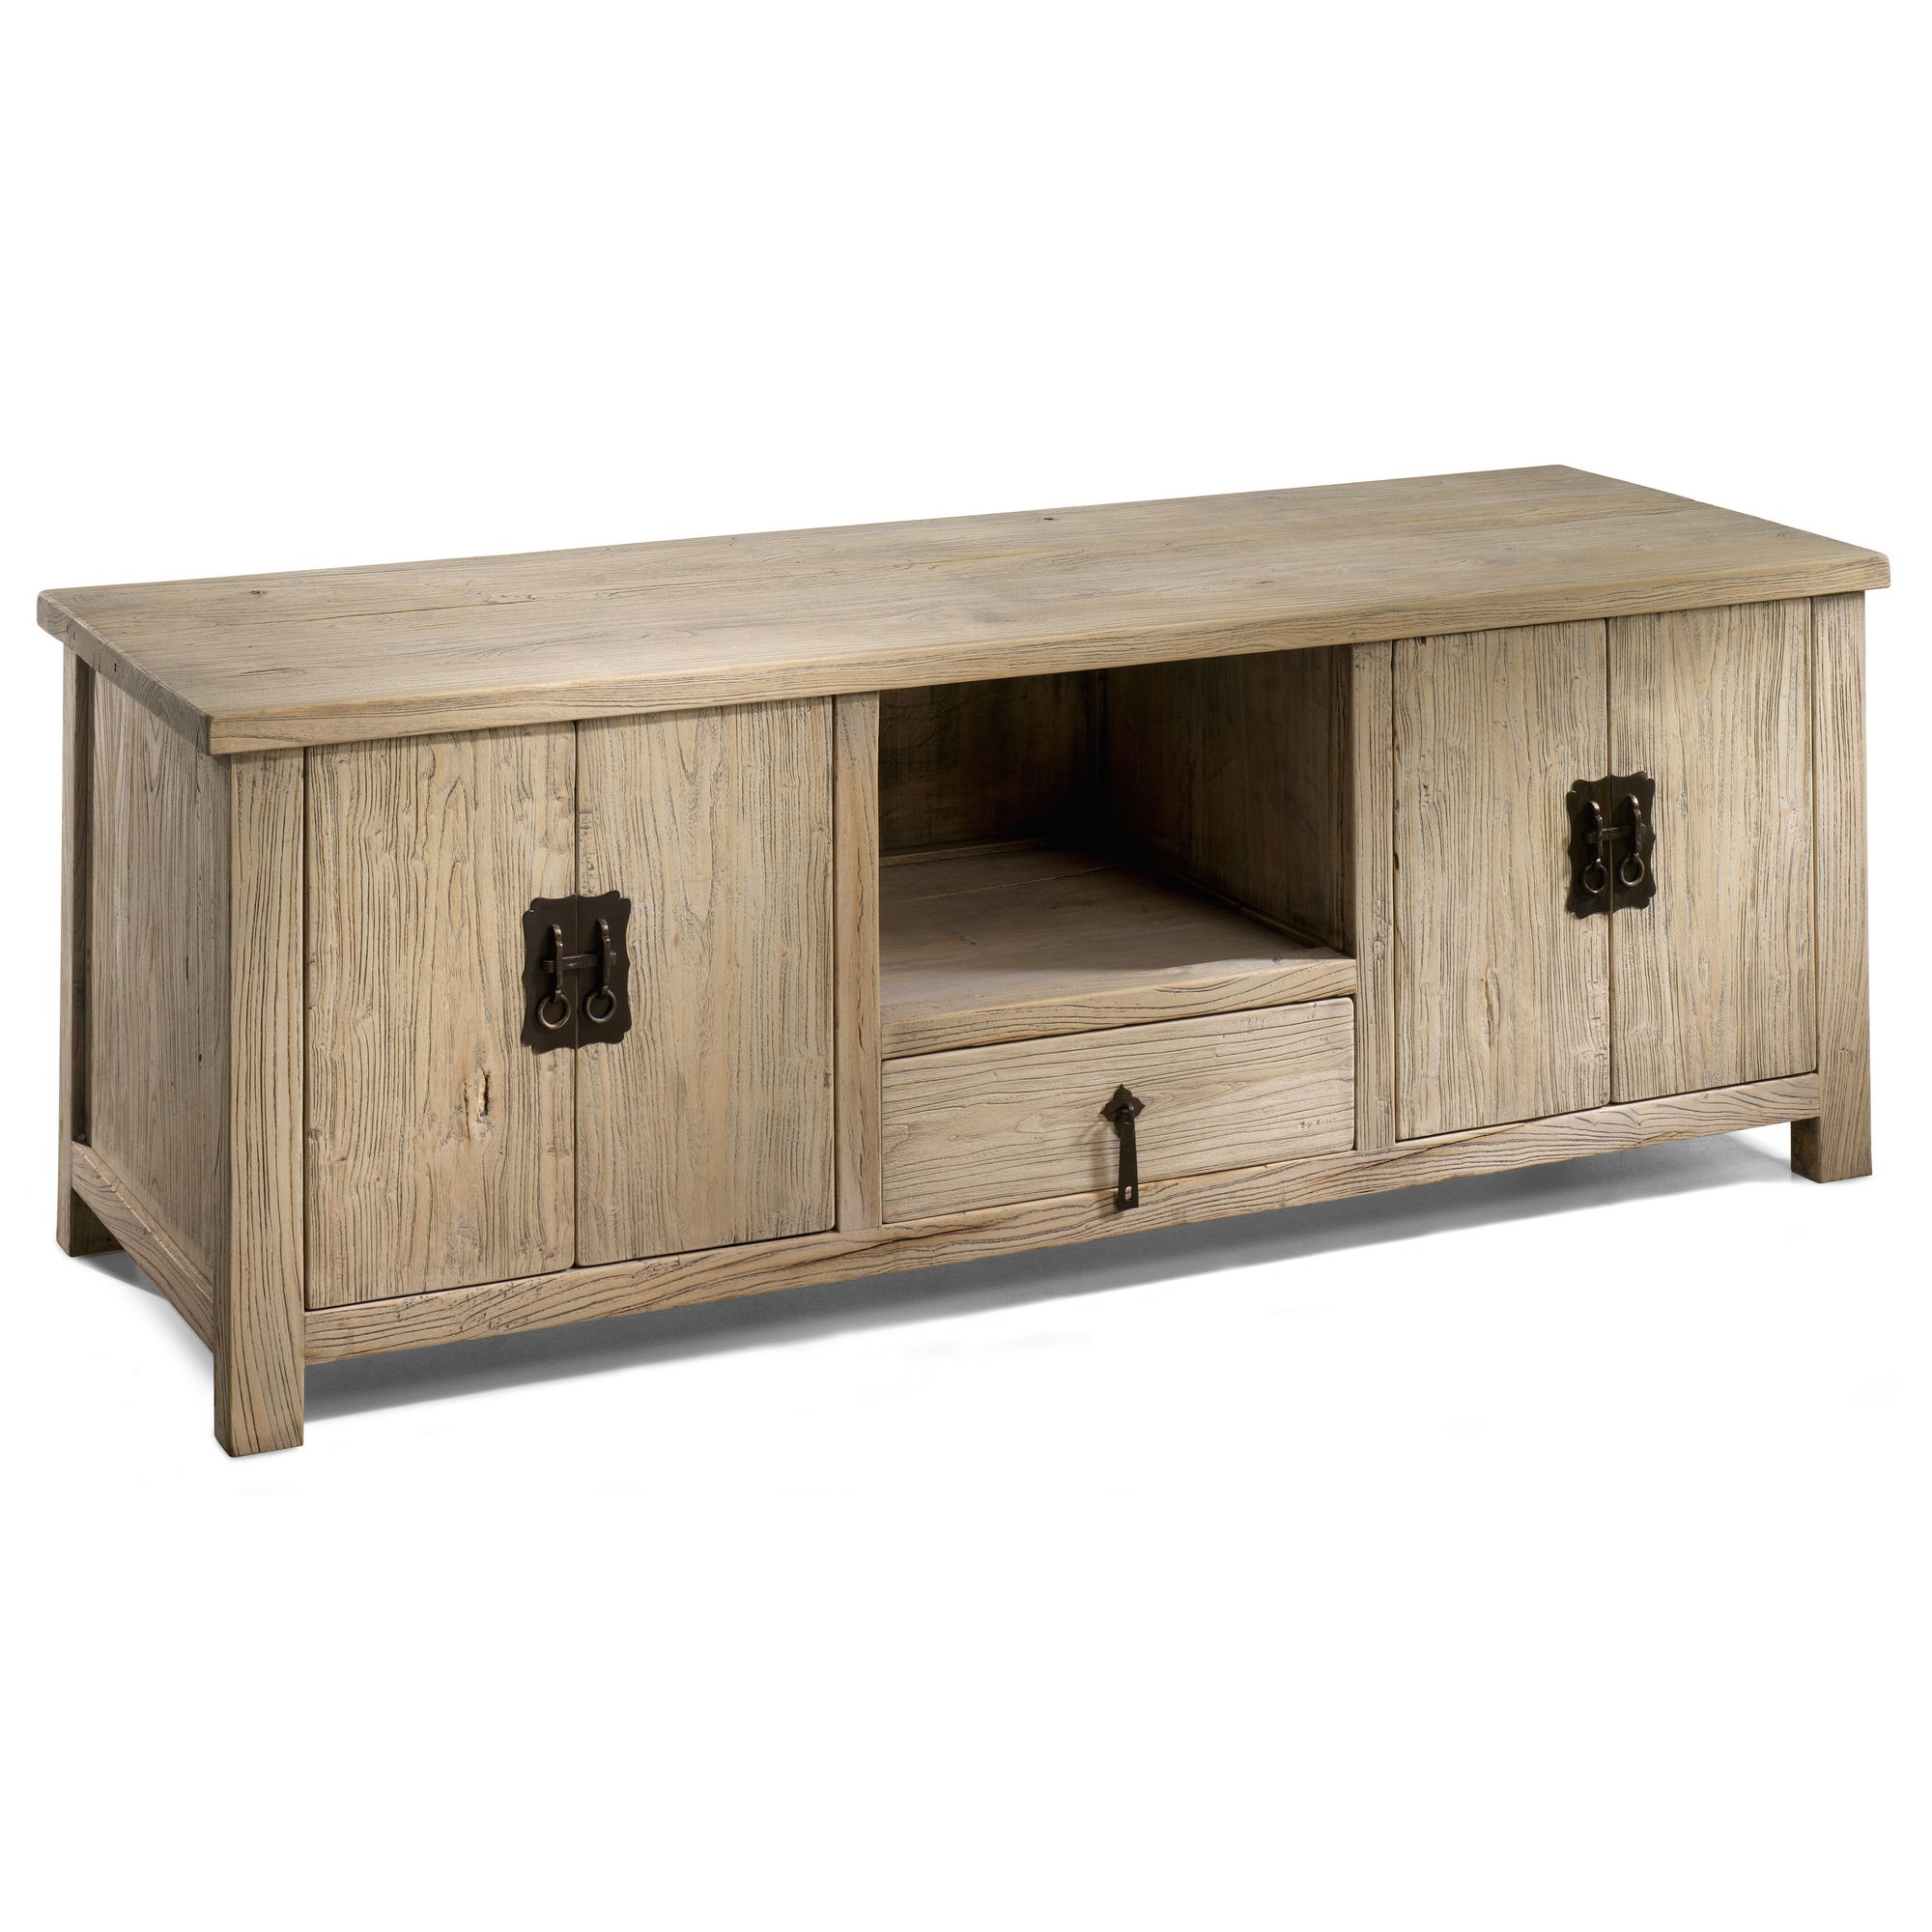 Shimu Chinese Country Furniture Media Console at Tesco Direct